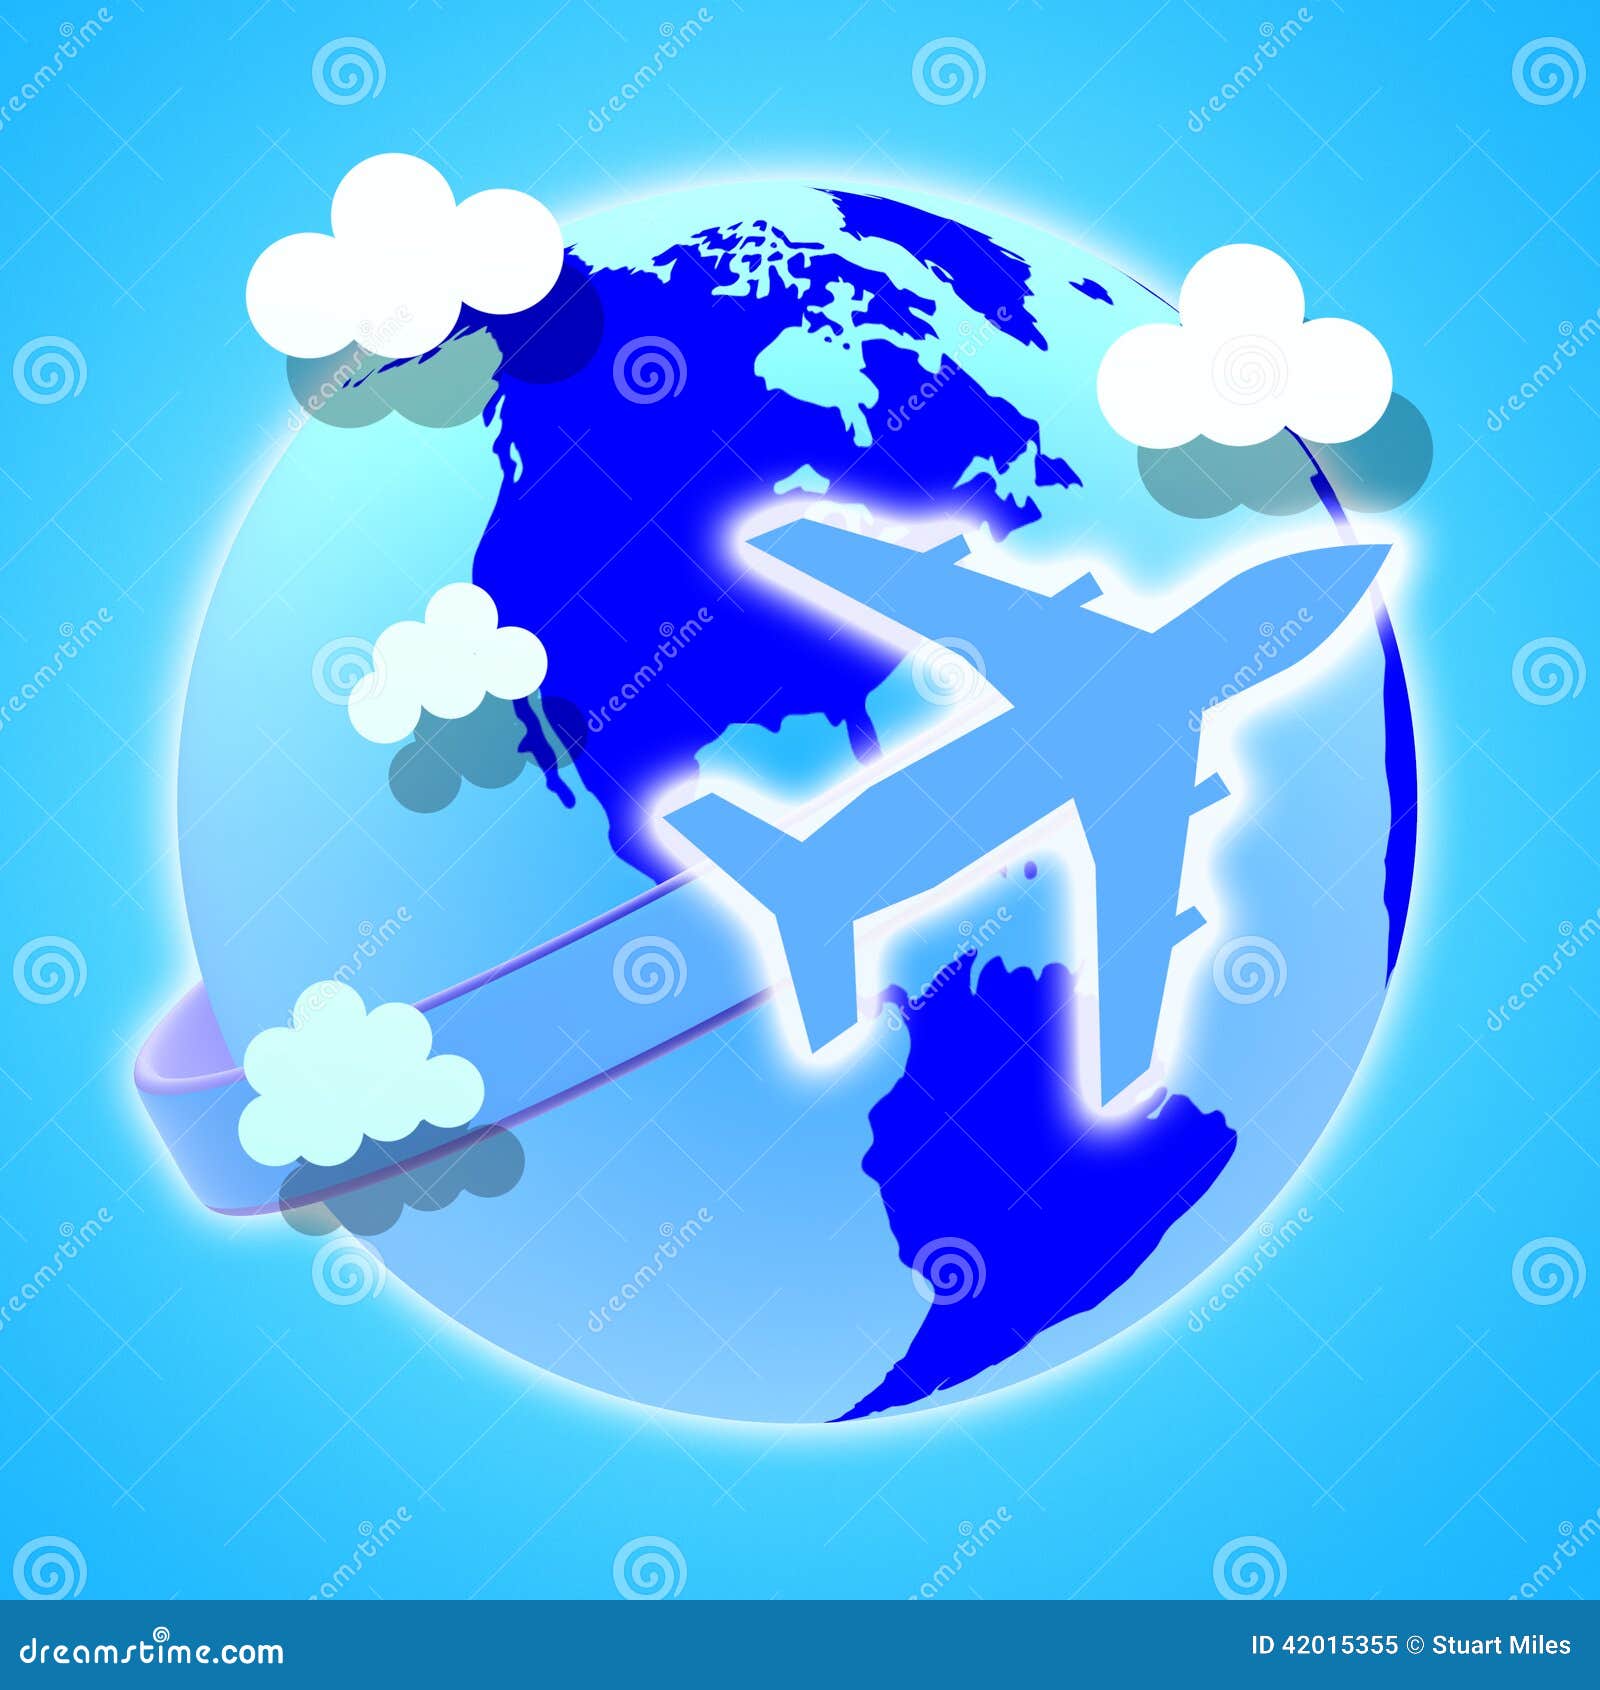 Flights Global Means Travel Guide and Worldly Stock Illustration ...